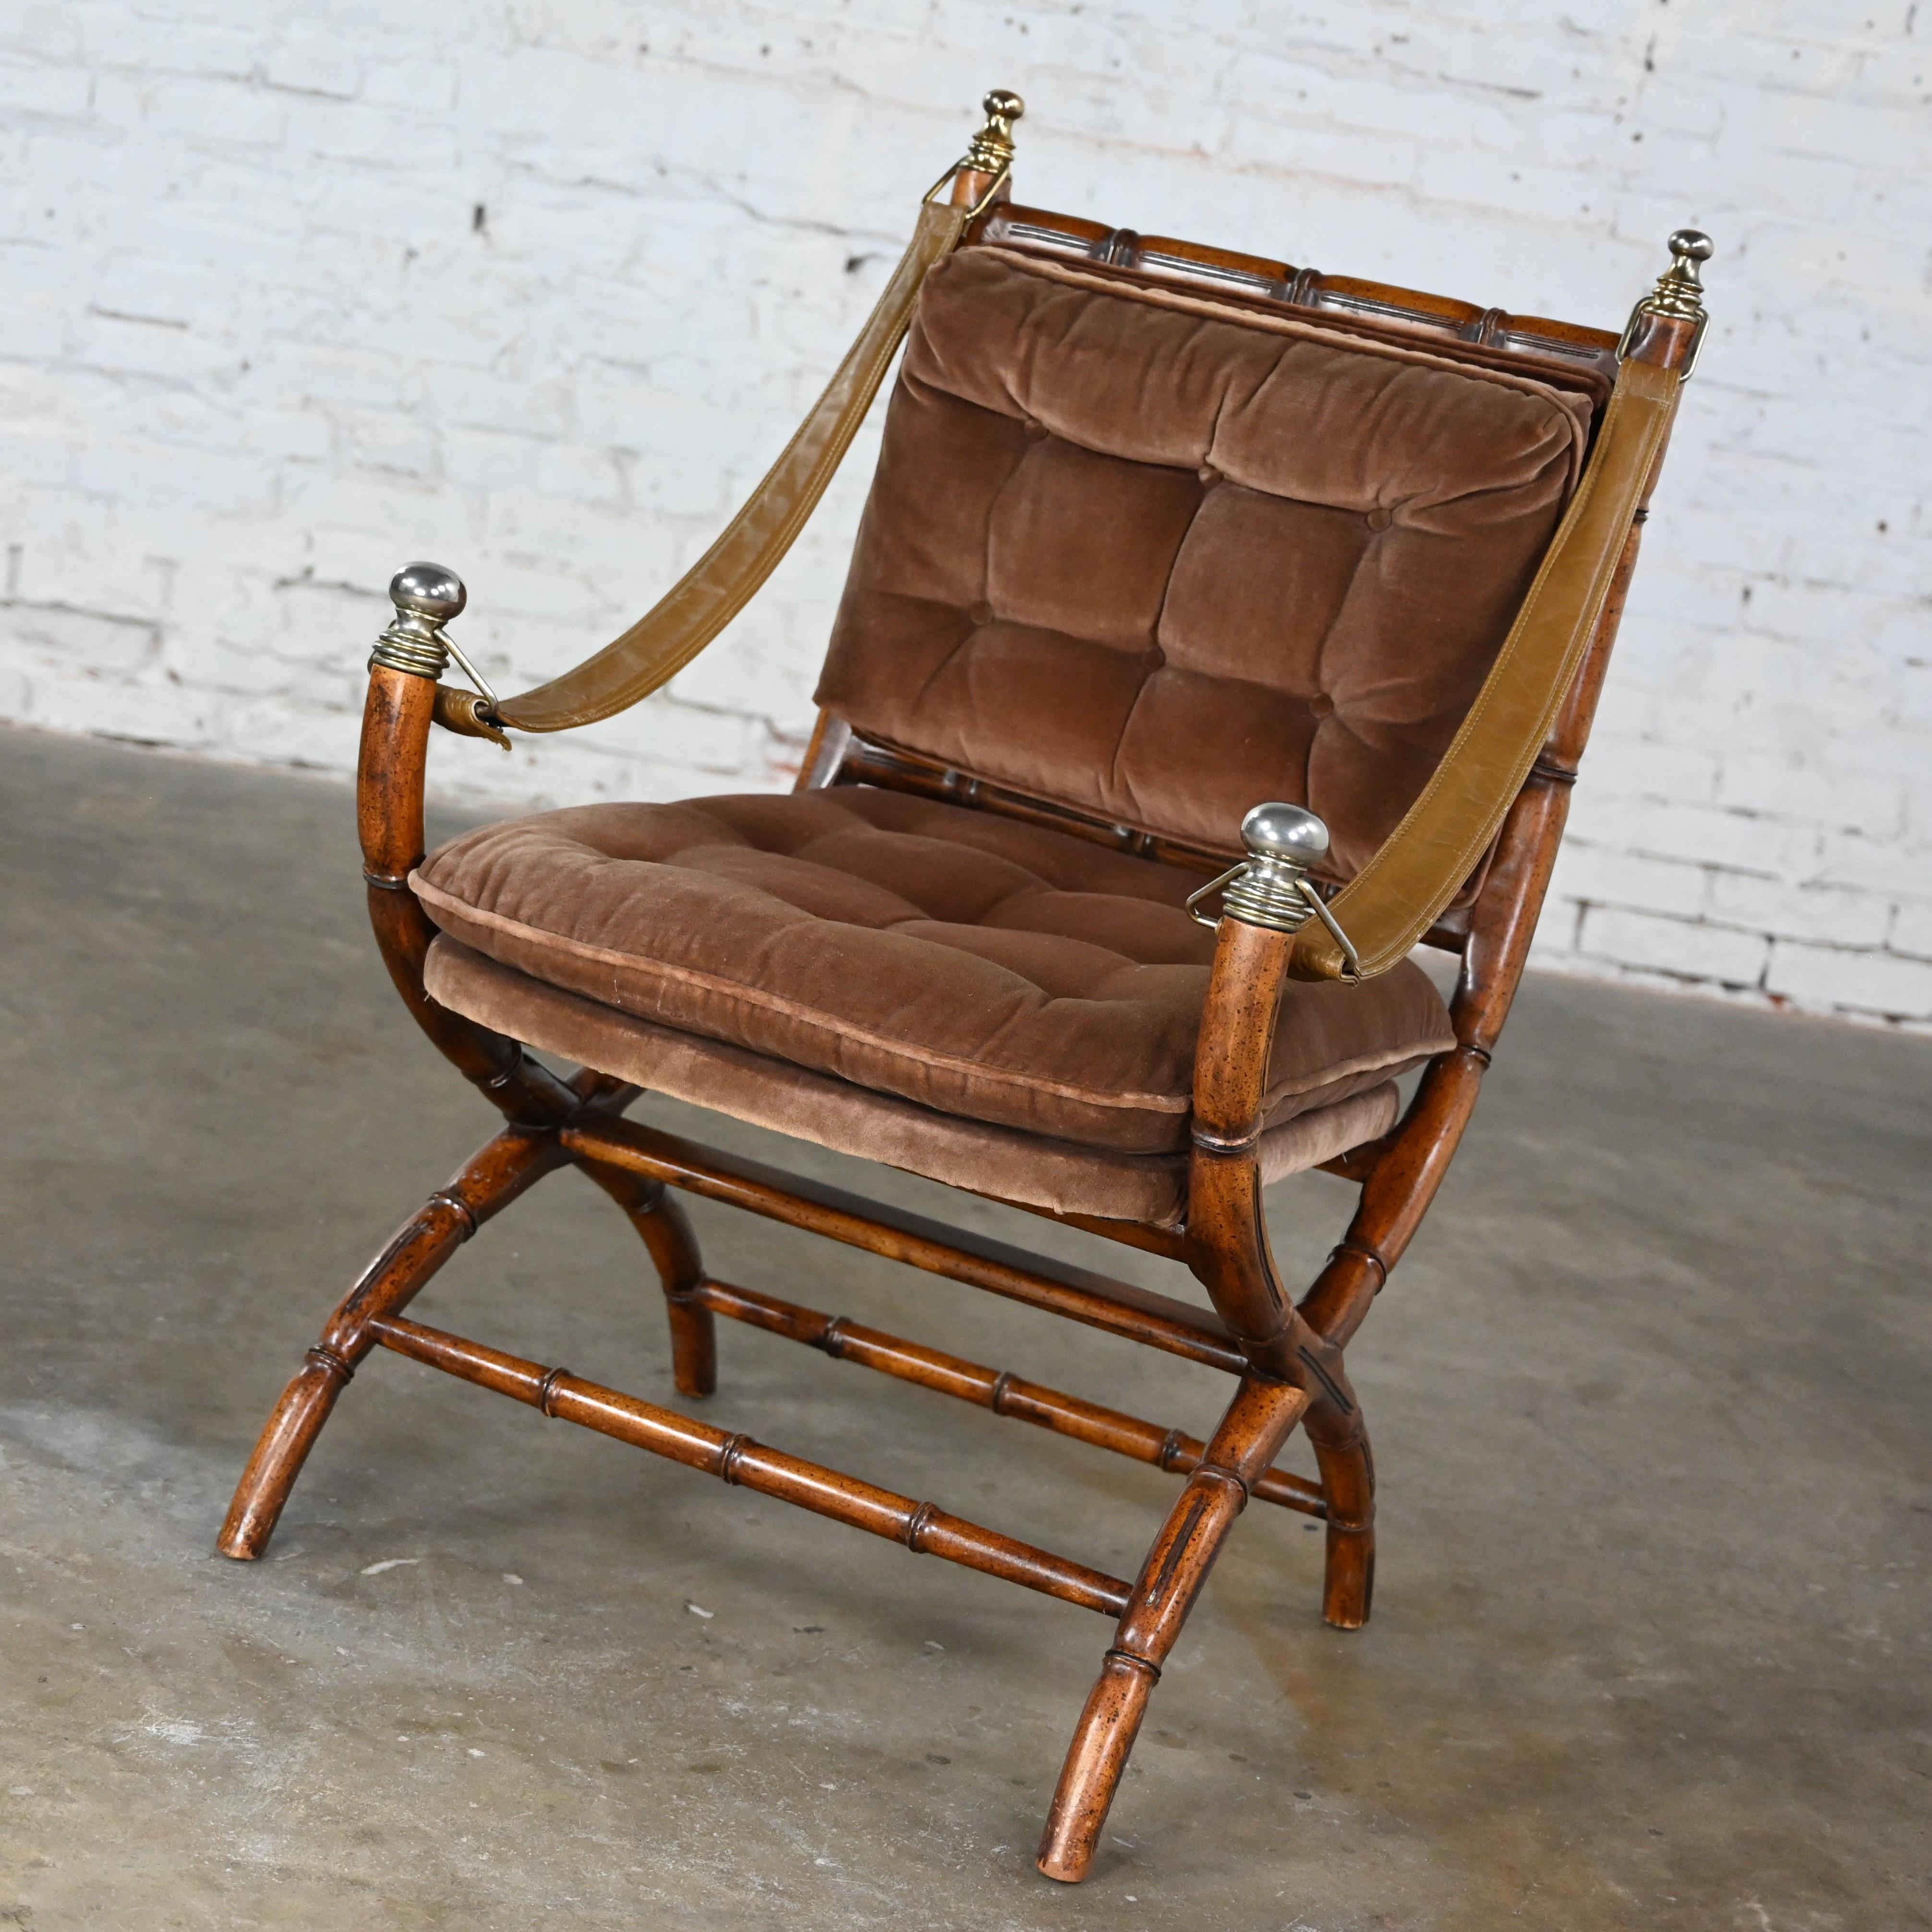 Wonderful vintage Campaign style chair with an X-shaped base, brown vinyl faux leather sling arm straps, faux bamboo wood frame, brown chenille velvet upholstery and distressed brass/chrome details. Beautiful condition, keeping in mind that this is